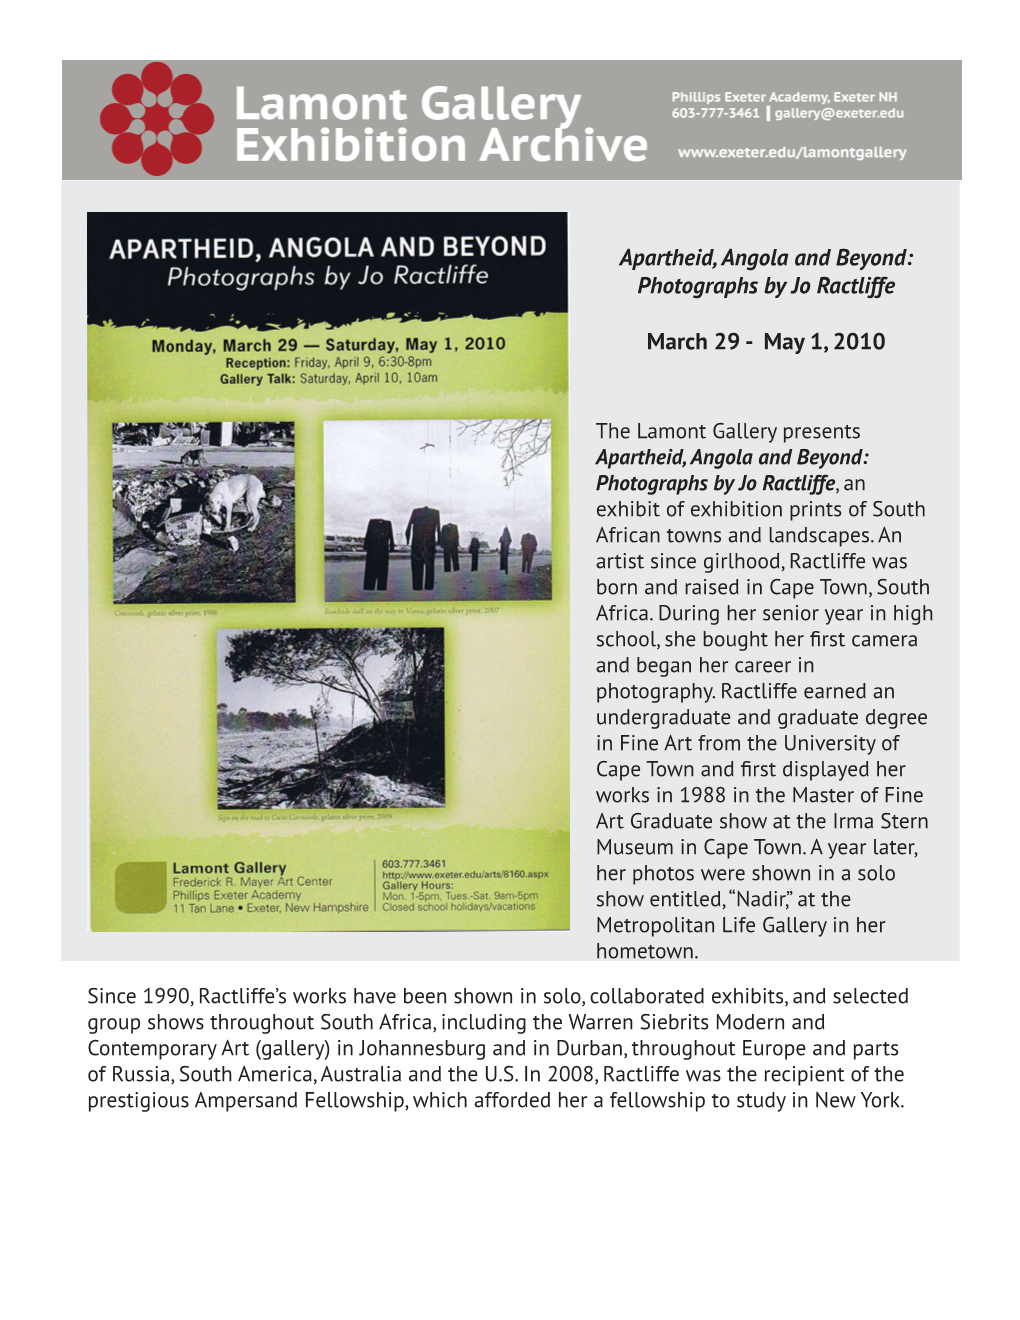 Apartheid, Angola and Beyond: Photographs by Jo Ractliffe March 29